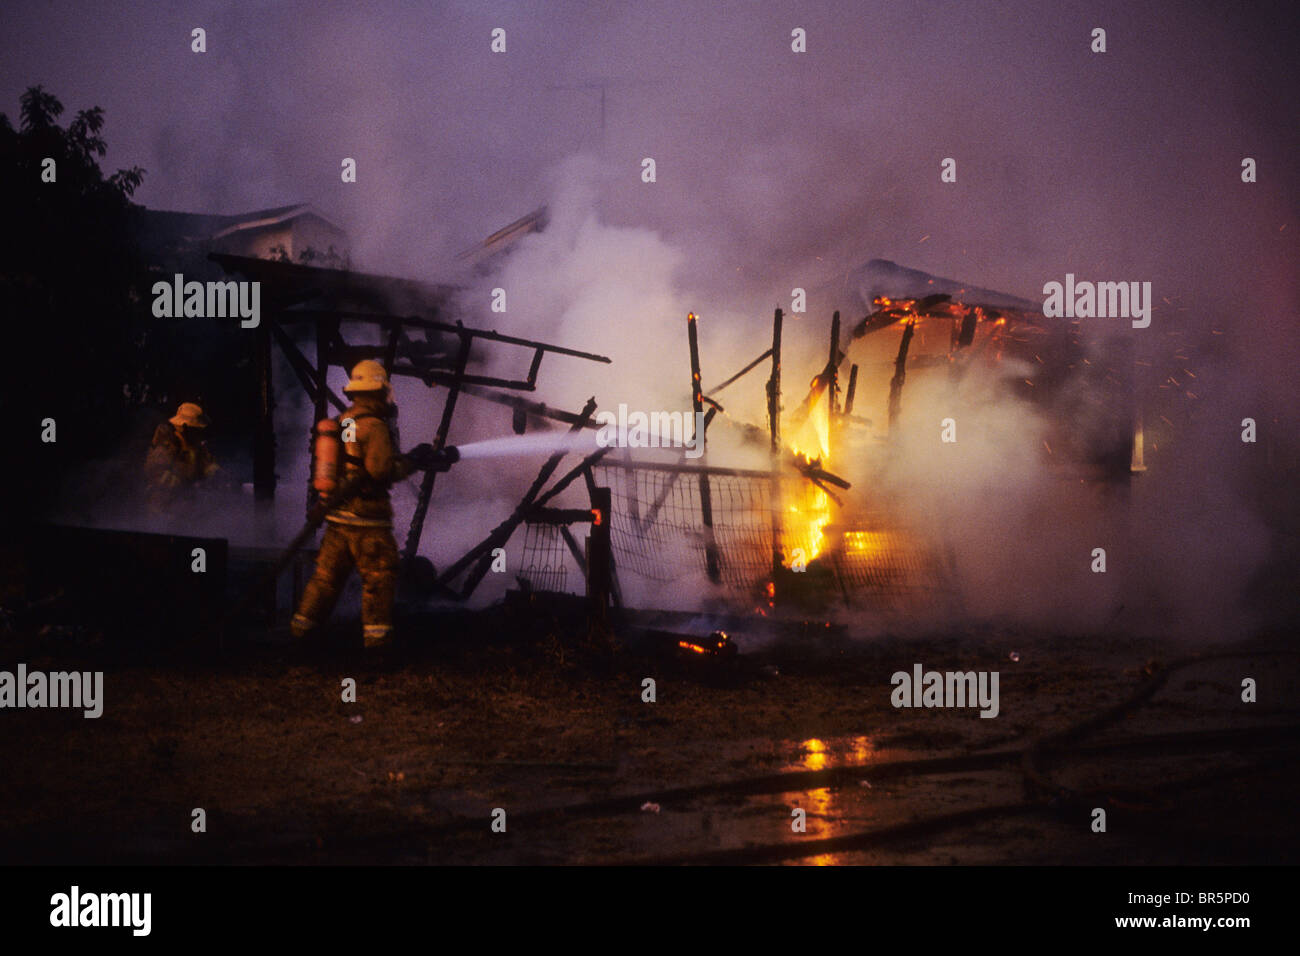 Fire destroy house home emergency 9-1-1 911 fighter fireman hose water fight flame smoke risk danger Stock Photo